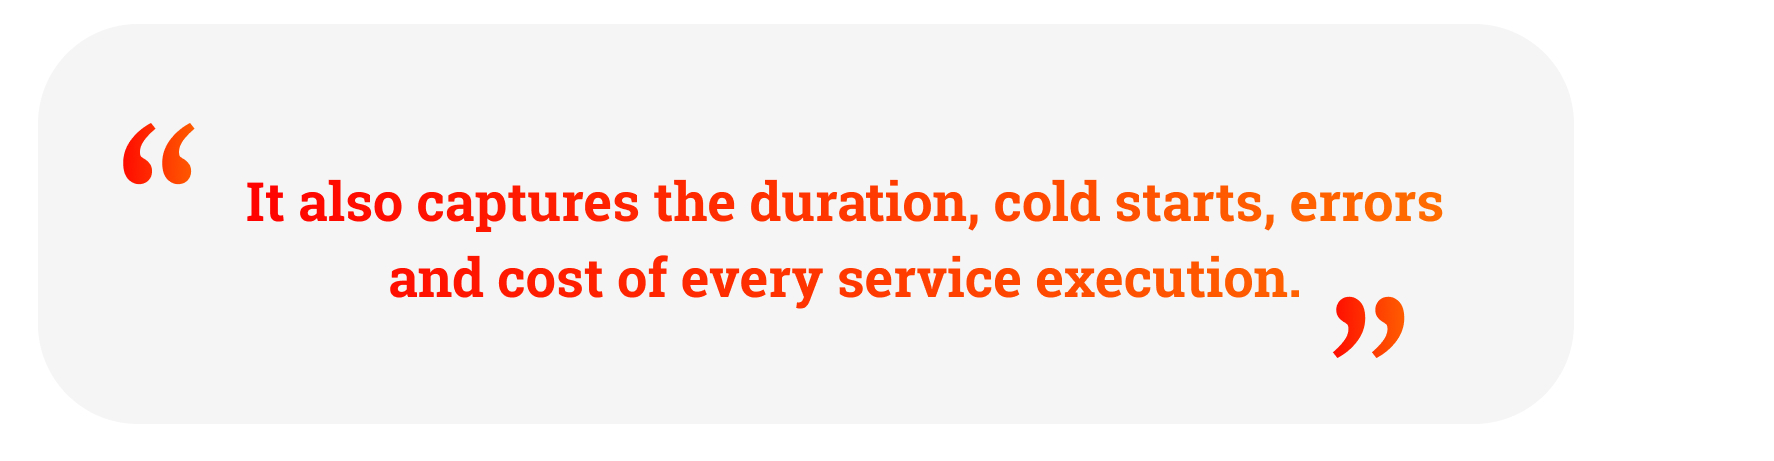 Quote: "It also captures the duration, cold starts, errors and cost of every service execution."